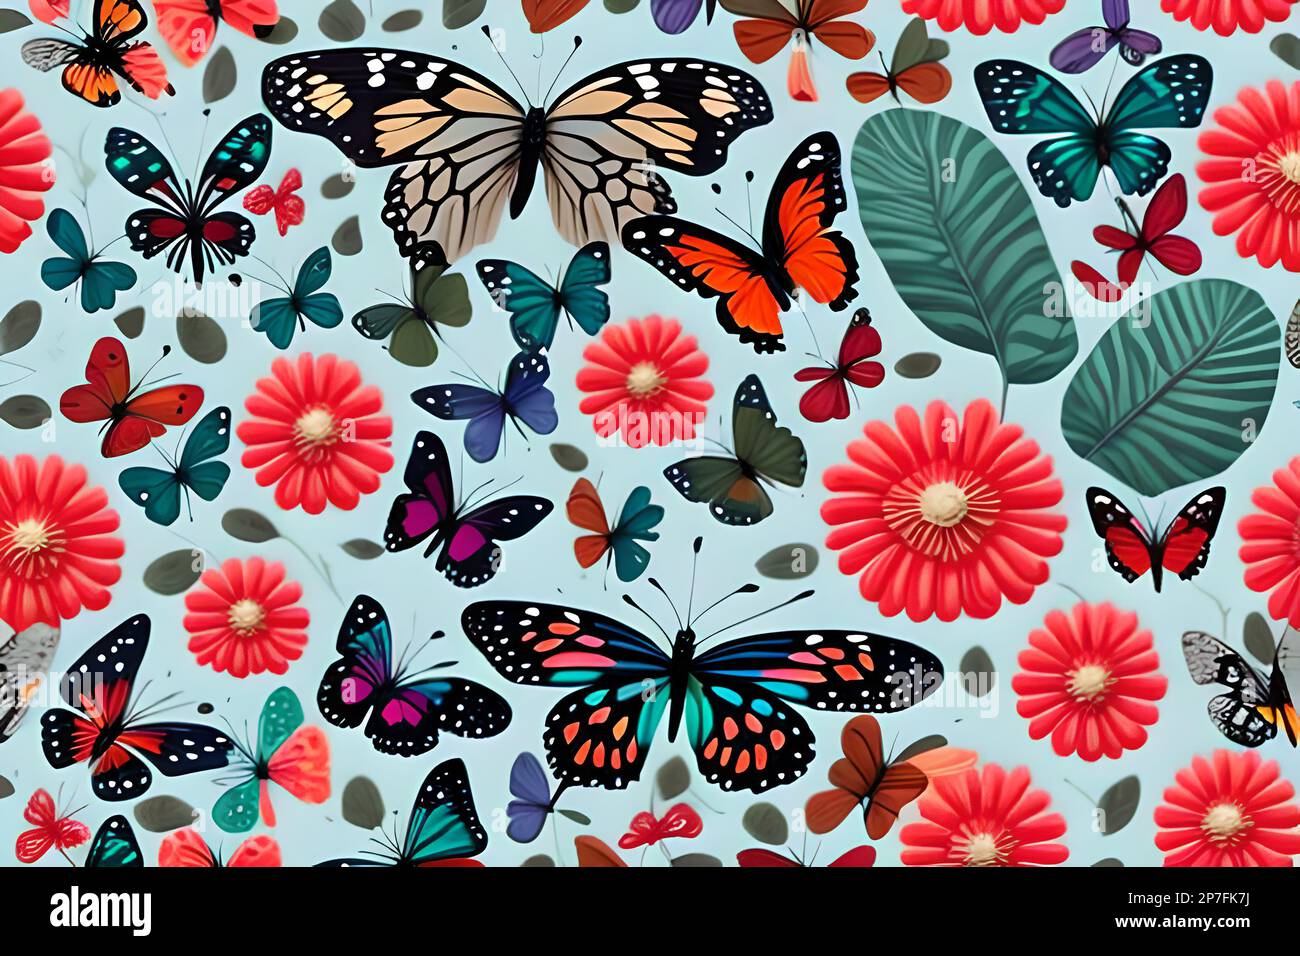 Irregular patterns with butterflies and flowers, a template sample for backgrounds with decorative graphic style objects in contrasted tones on light Stock Photo